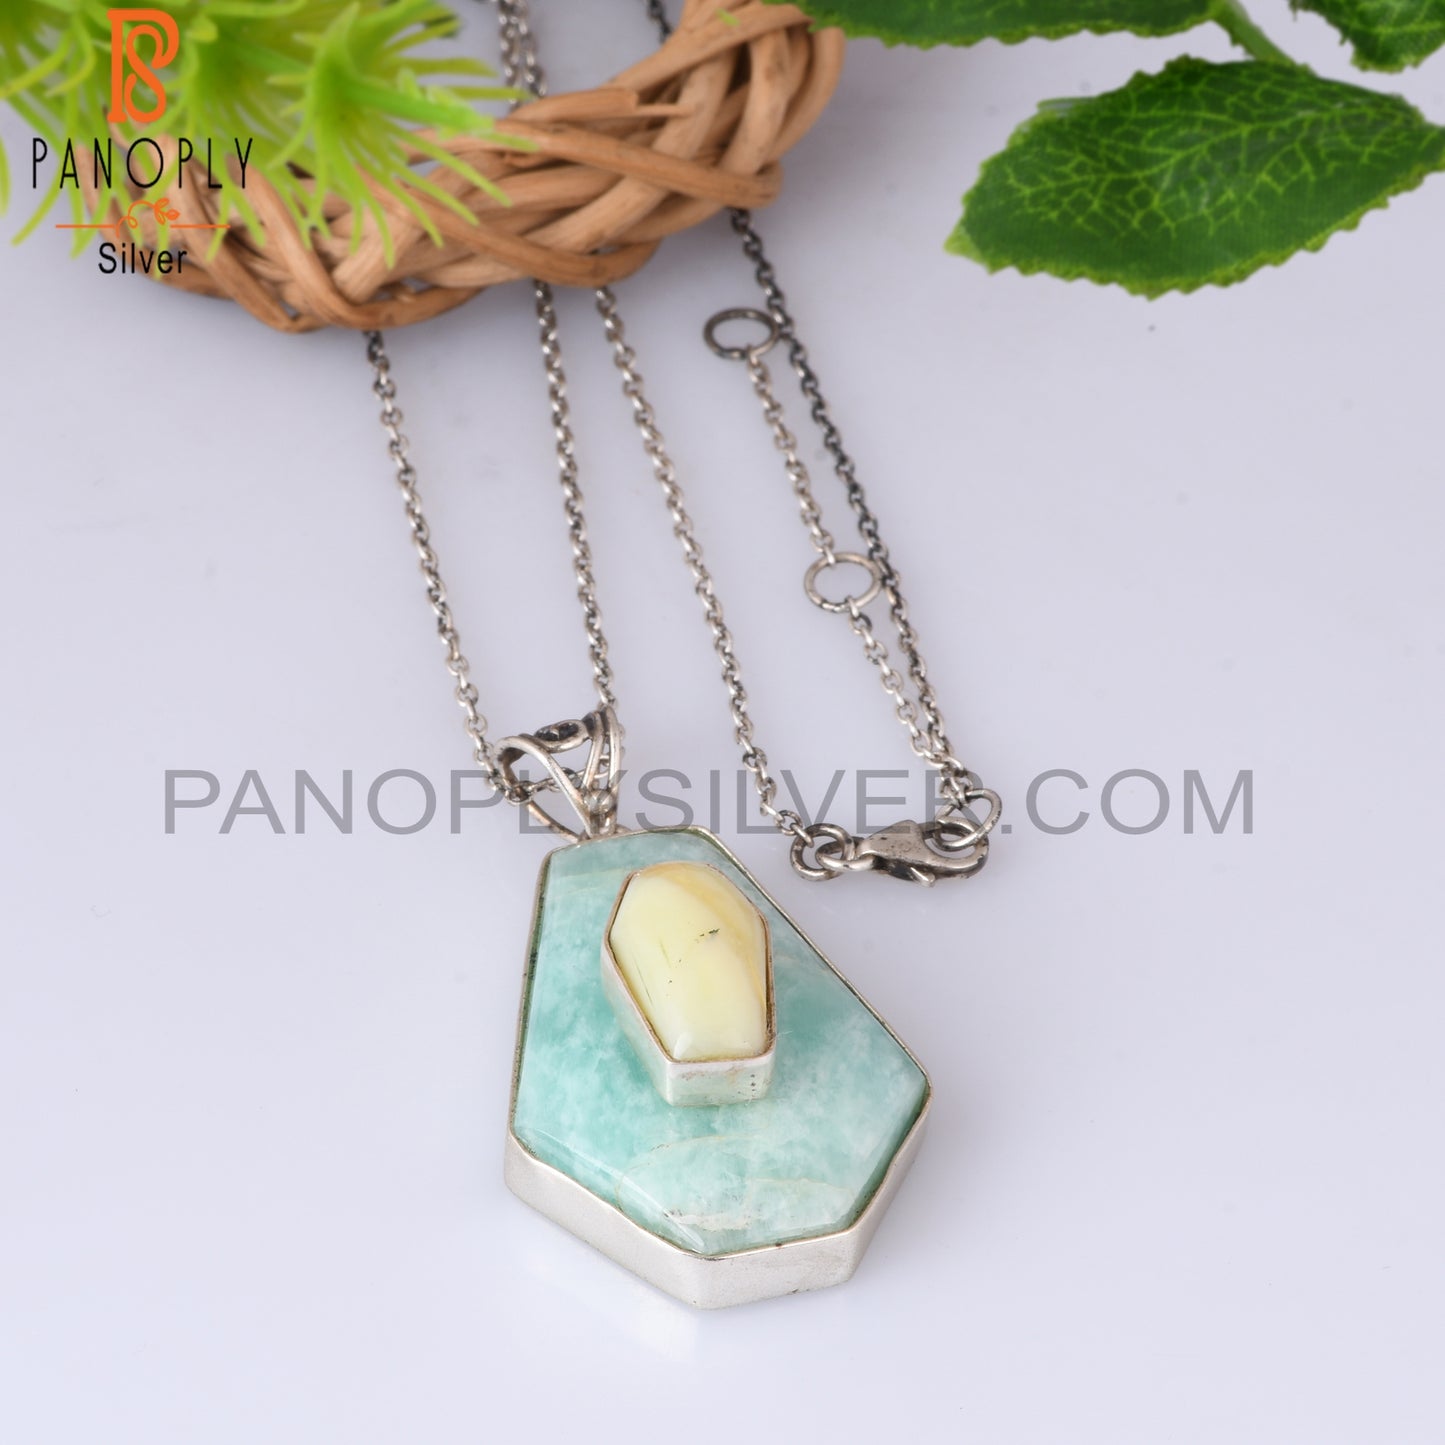 Yellow Opal & Amazonite Coffin Silver Pendant With Chain